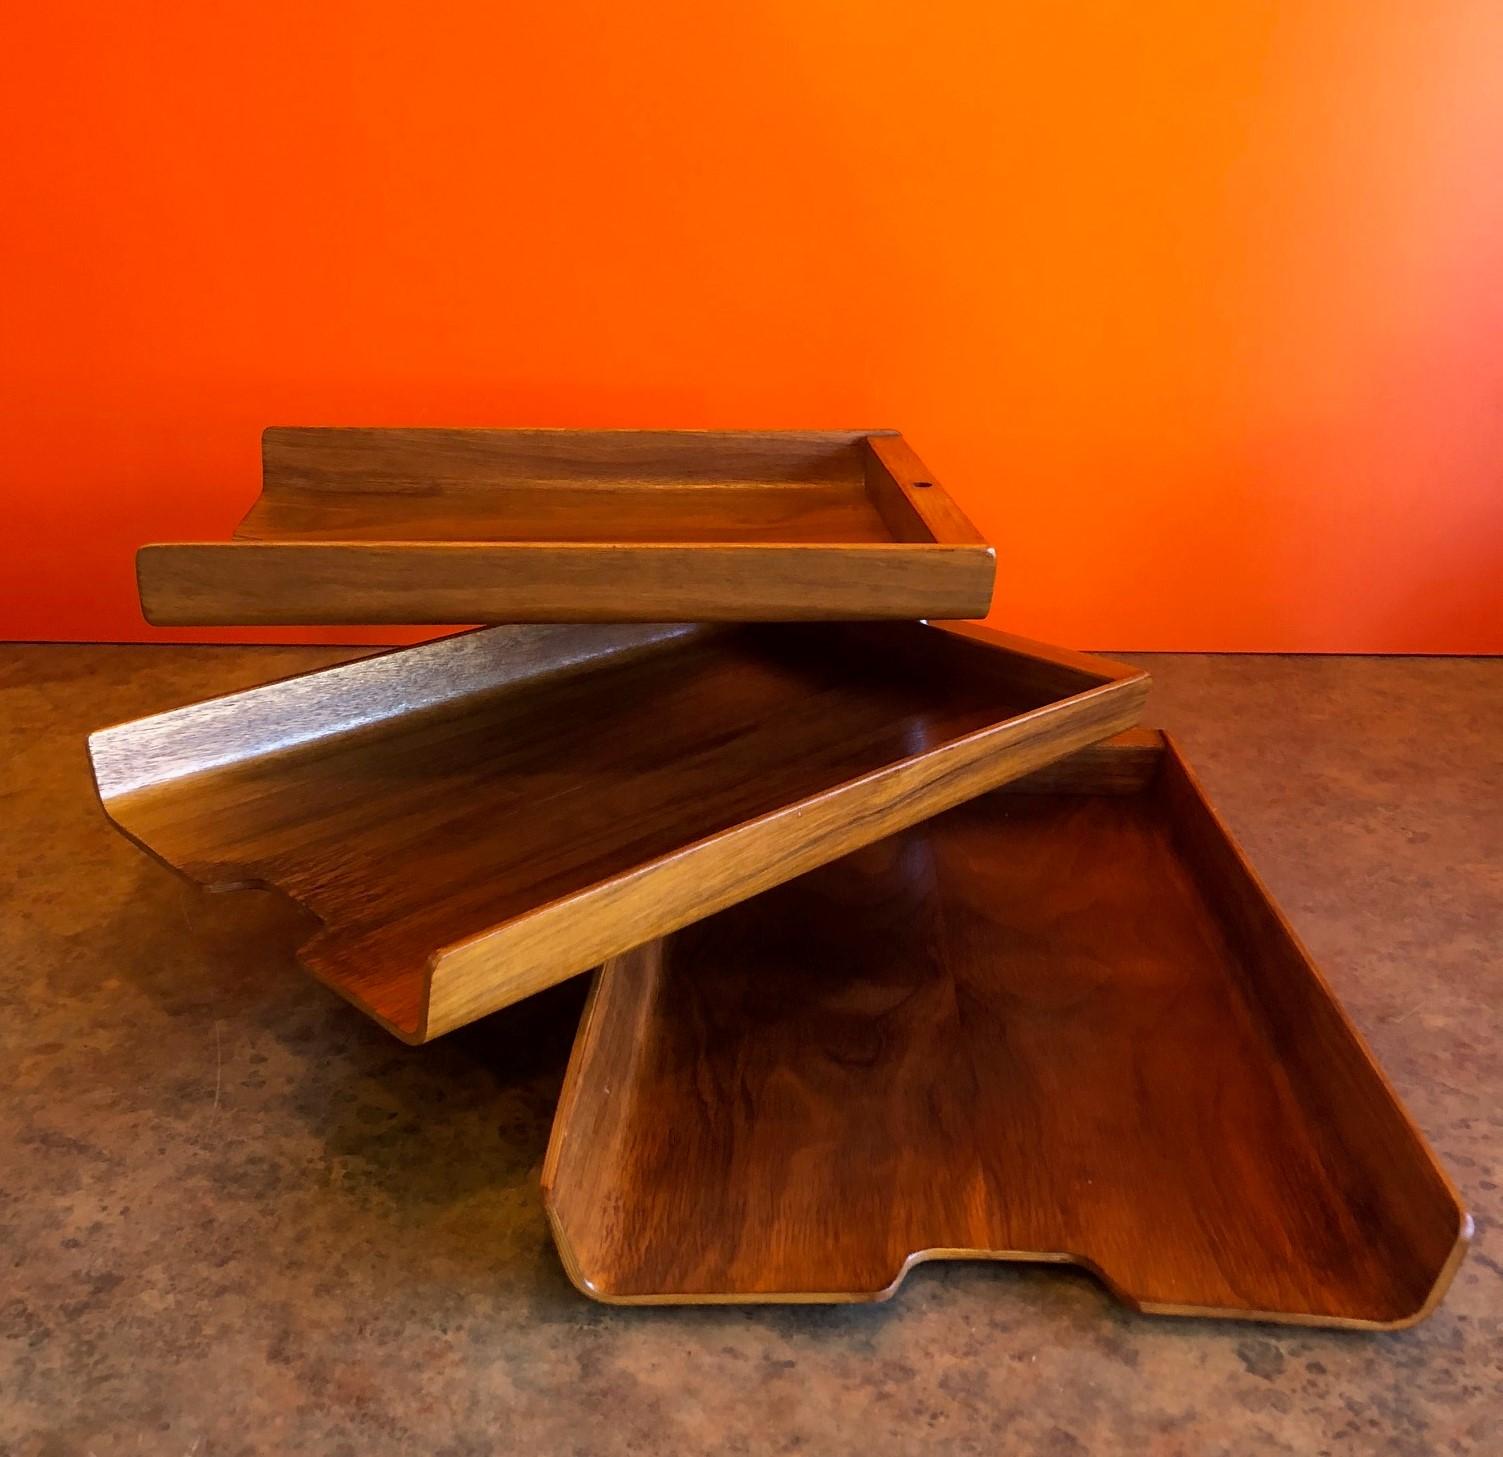 Very cool and functional triple letter tray by Martin Aberg for Rainbow Wood Products Company of Sweden, circa 1960s. The trays are made of molded teak plywood and can swivel into any number of configurations to meet your office needs. The set is in